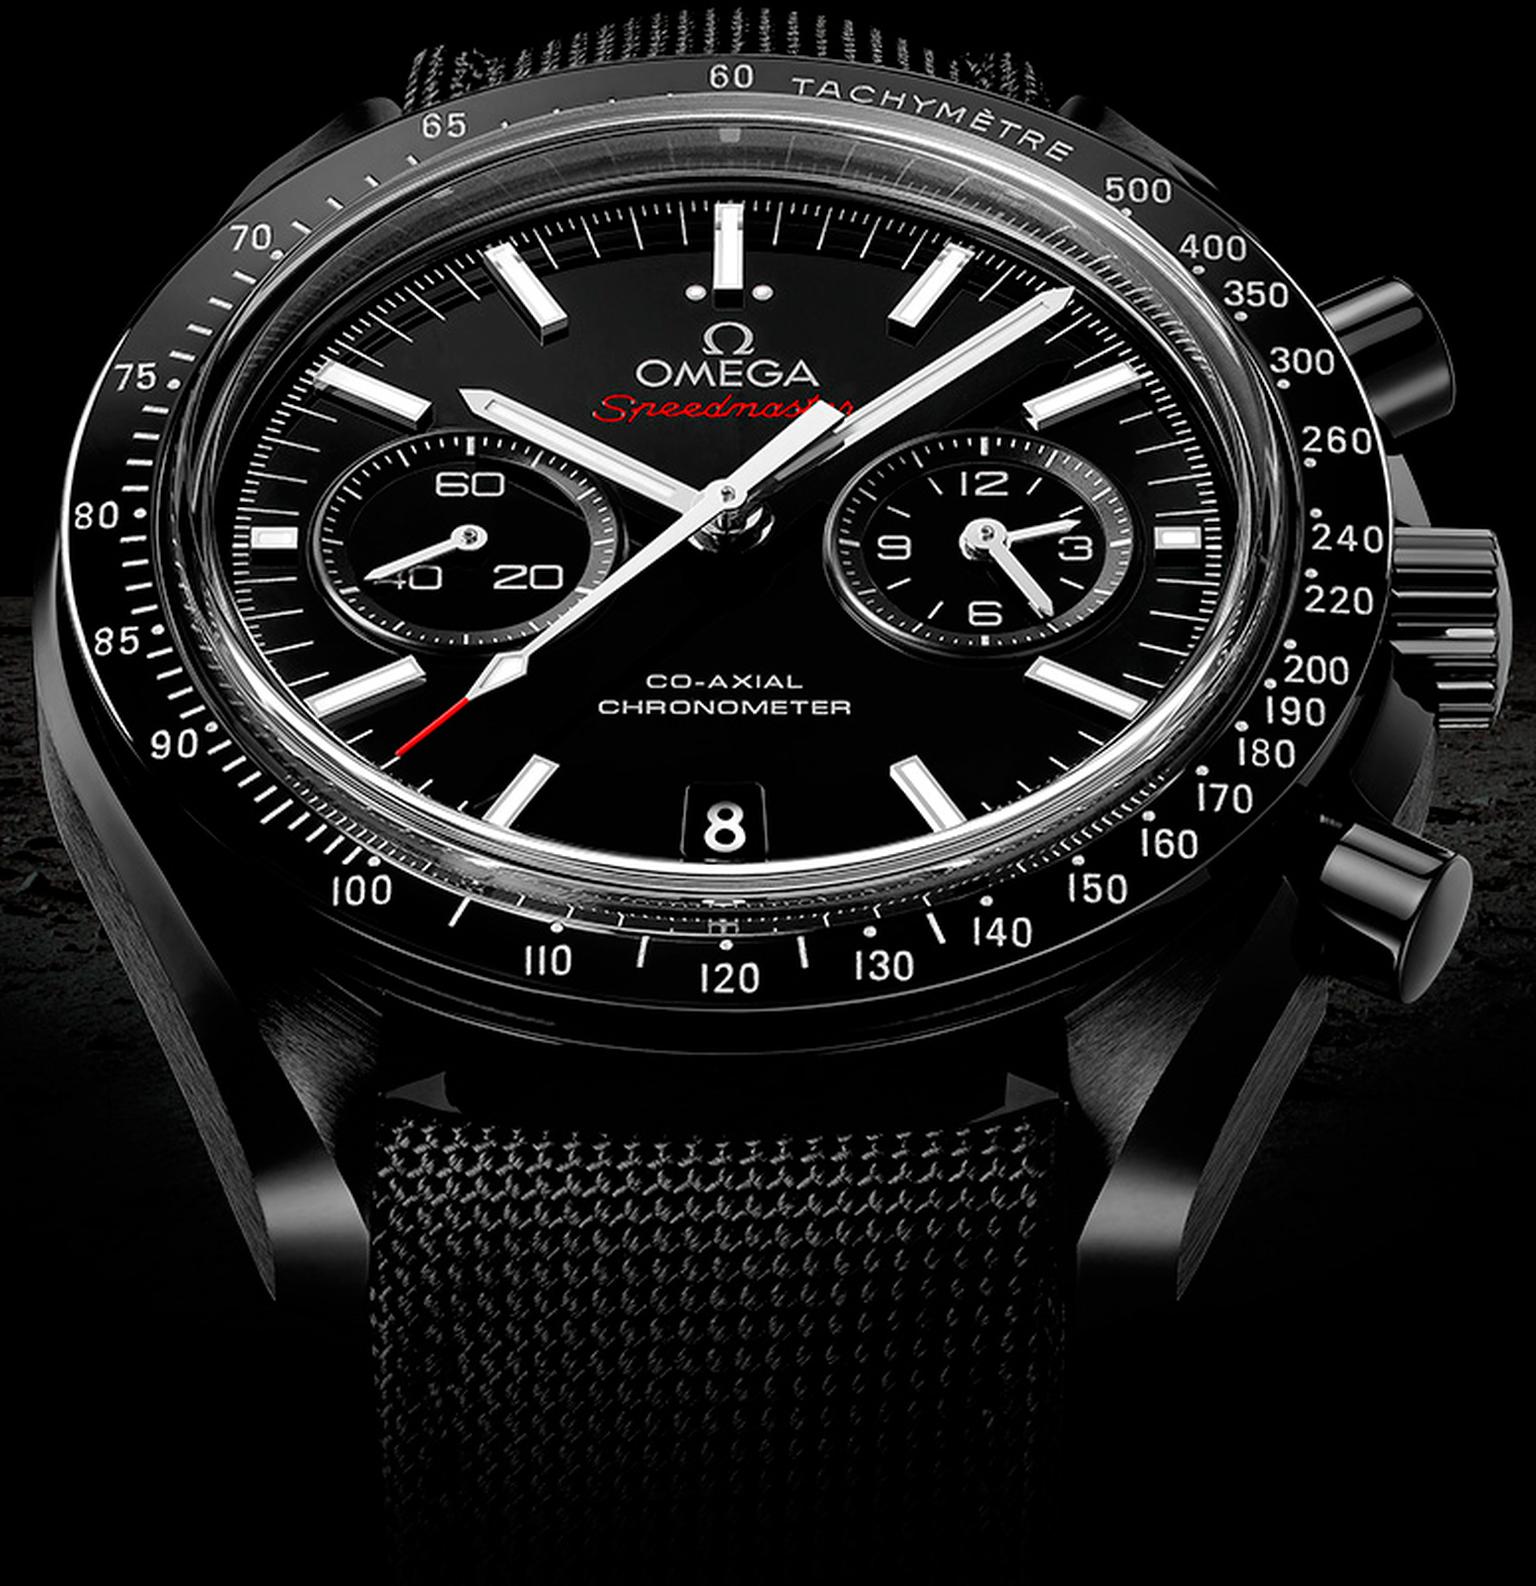 When Omega found out that a model from its Speedmaster family had made the epic Moon landing on Buzz Aldrin’s wrist in 1969, the lucrative and well-earned legend of the Moonwatch was born. The Speedmaster Dark Side of the Moon watch continues the saga.